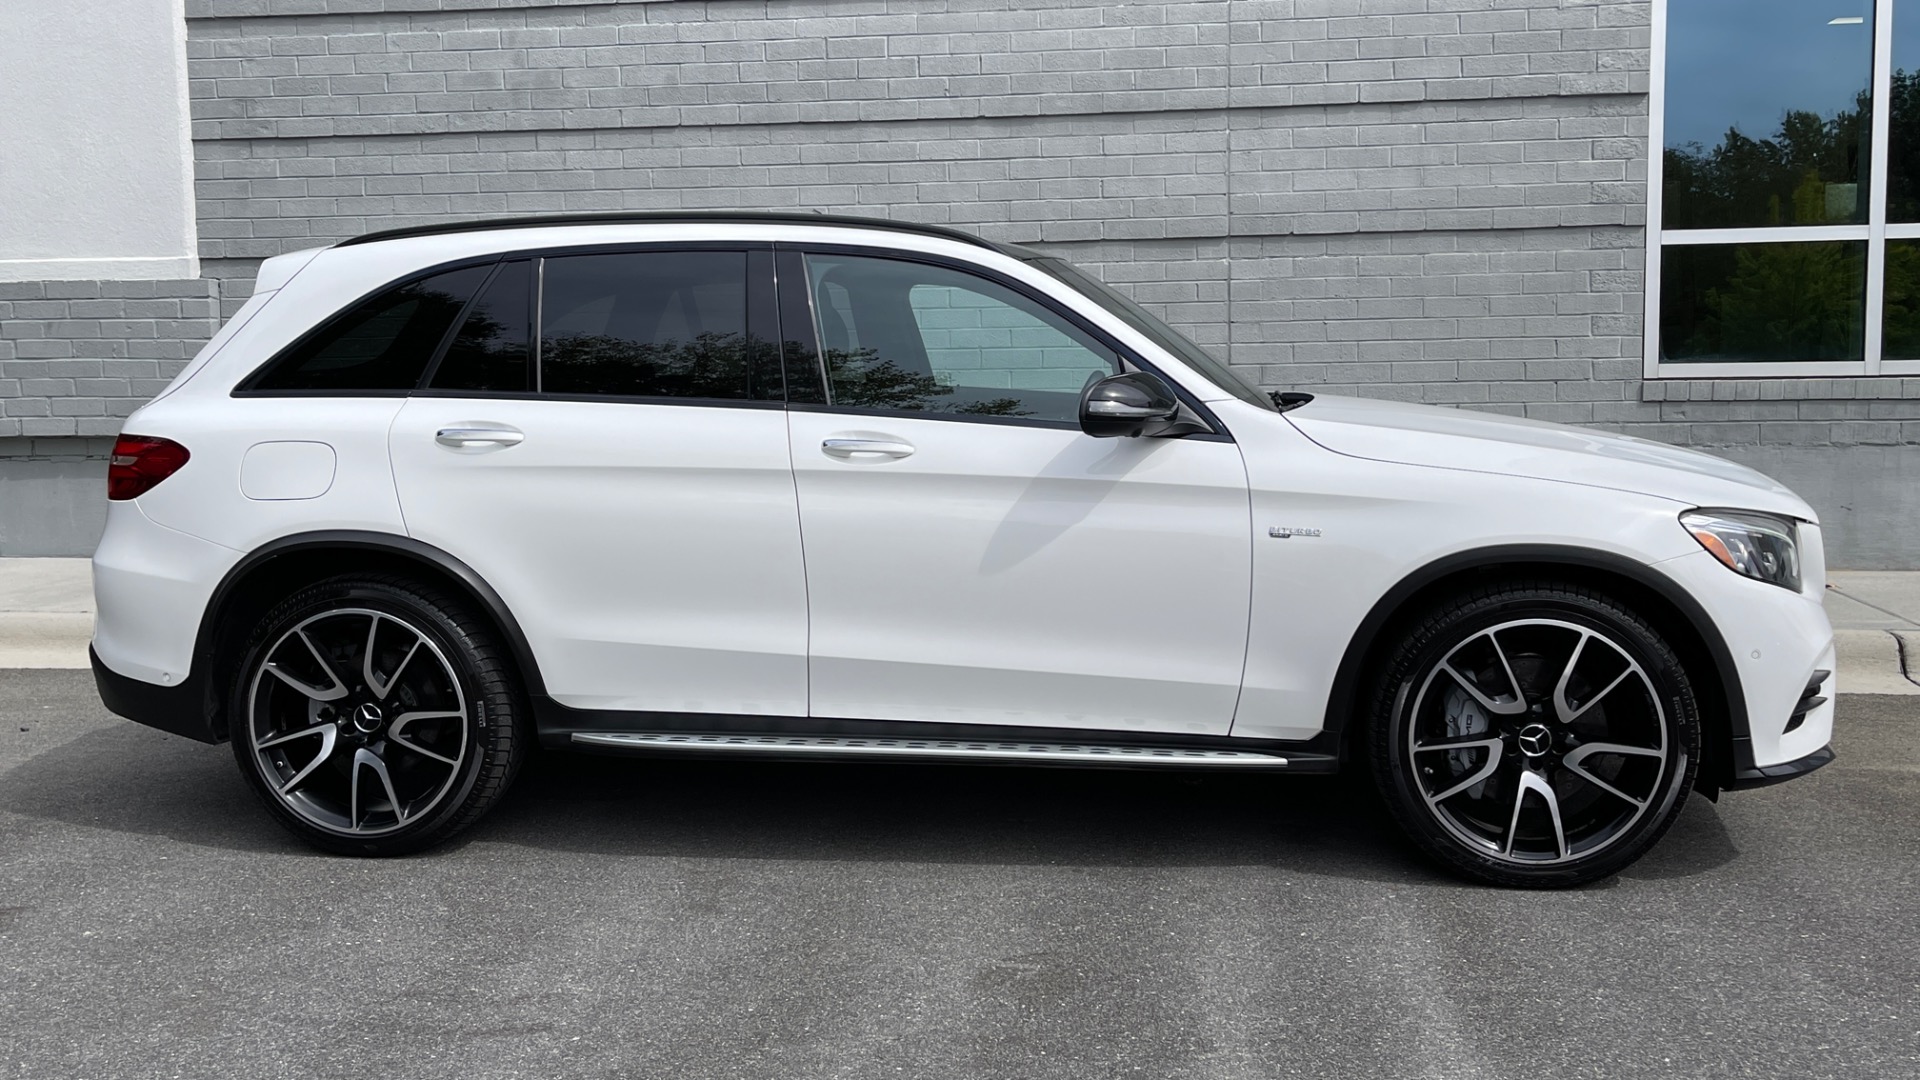 Used 2019 Mercedes-Benz GLC AMG GLC 43 / AMG BLACKOUT / 21IN WHEELS / AMG EXHAUST / EXTERIOR LIGHTING for sale $48,999 at Formula Imports in Charlotte NC 28227 6